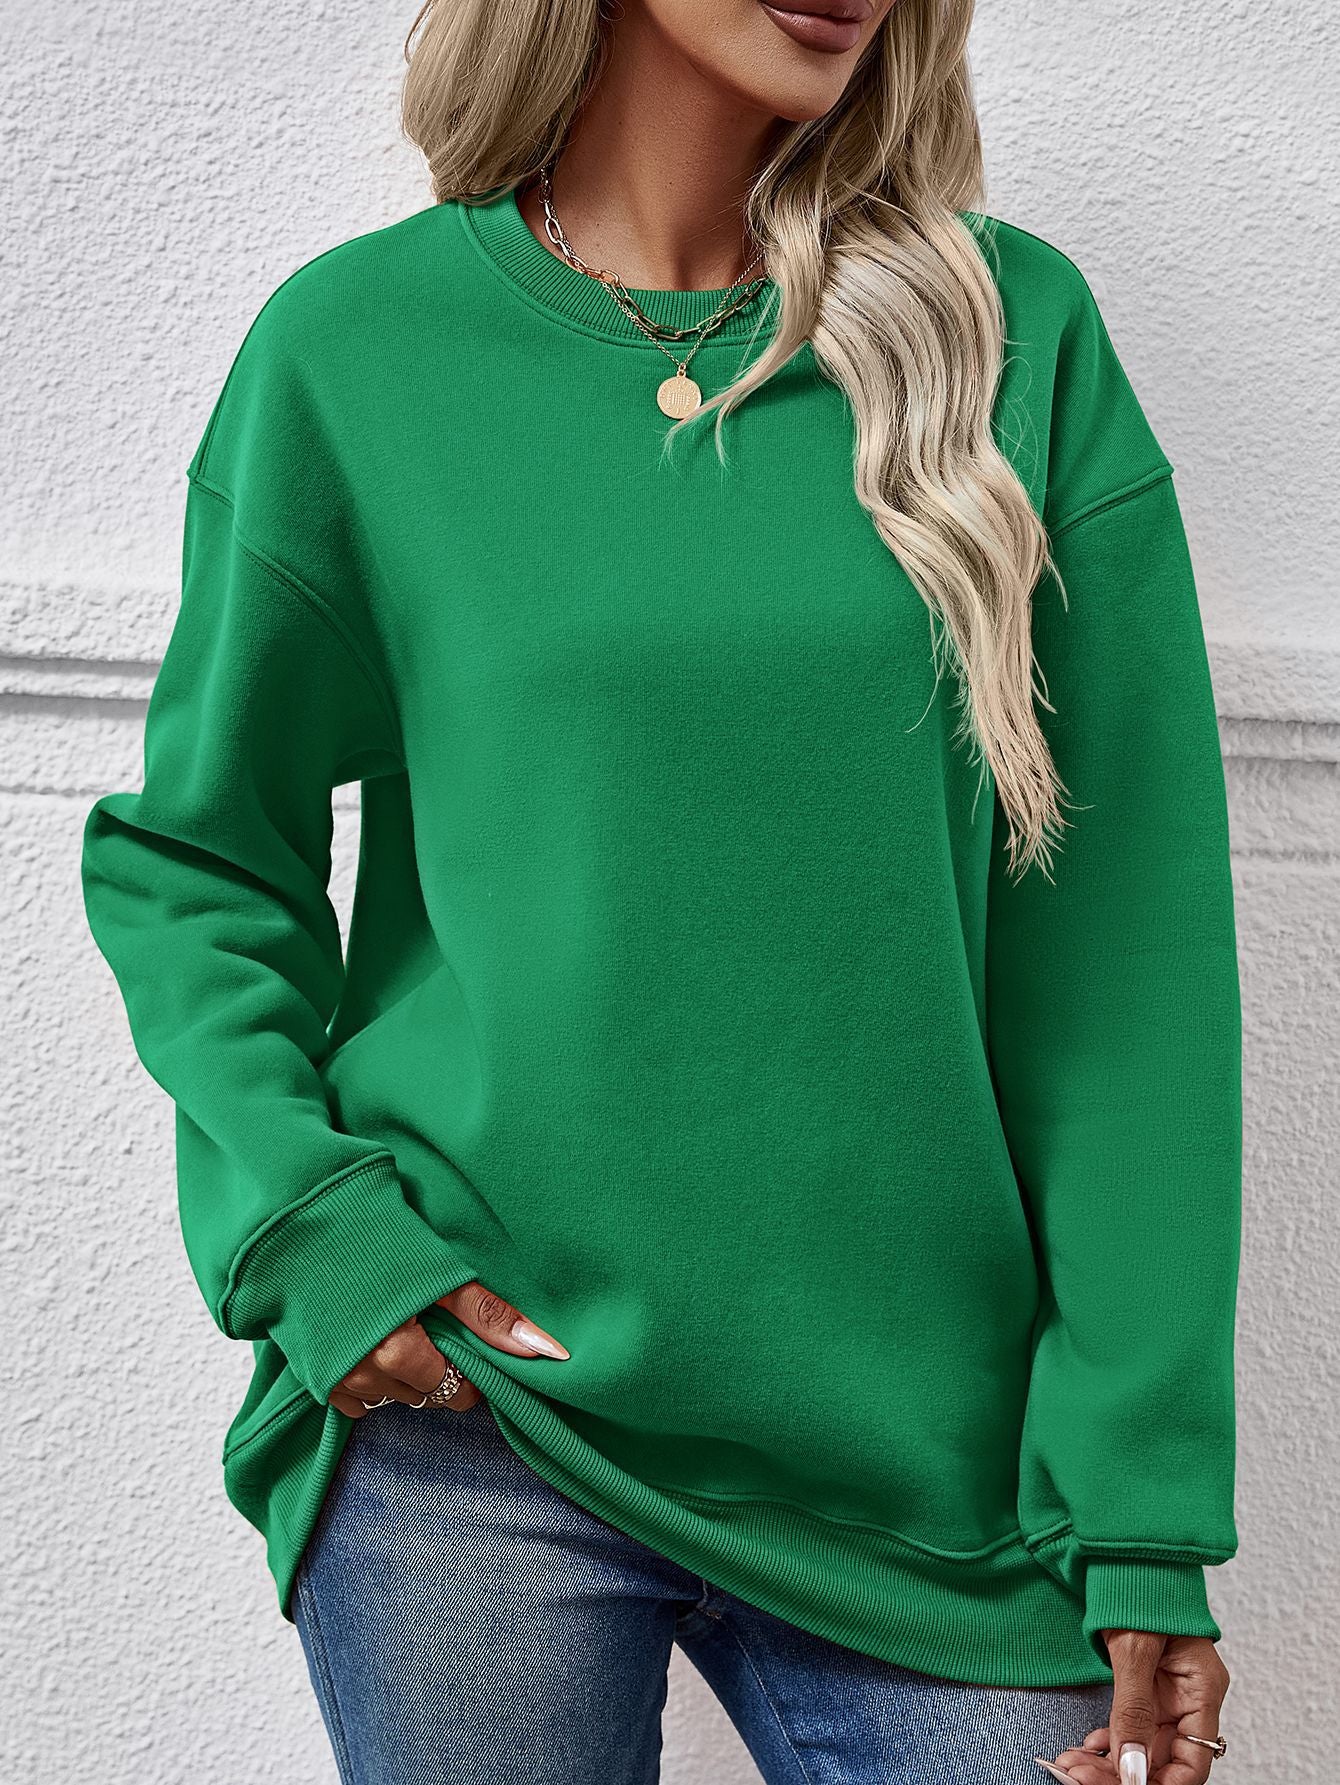 Women's Round Neck Long Sleeve Casual Loose Sweaters